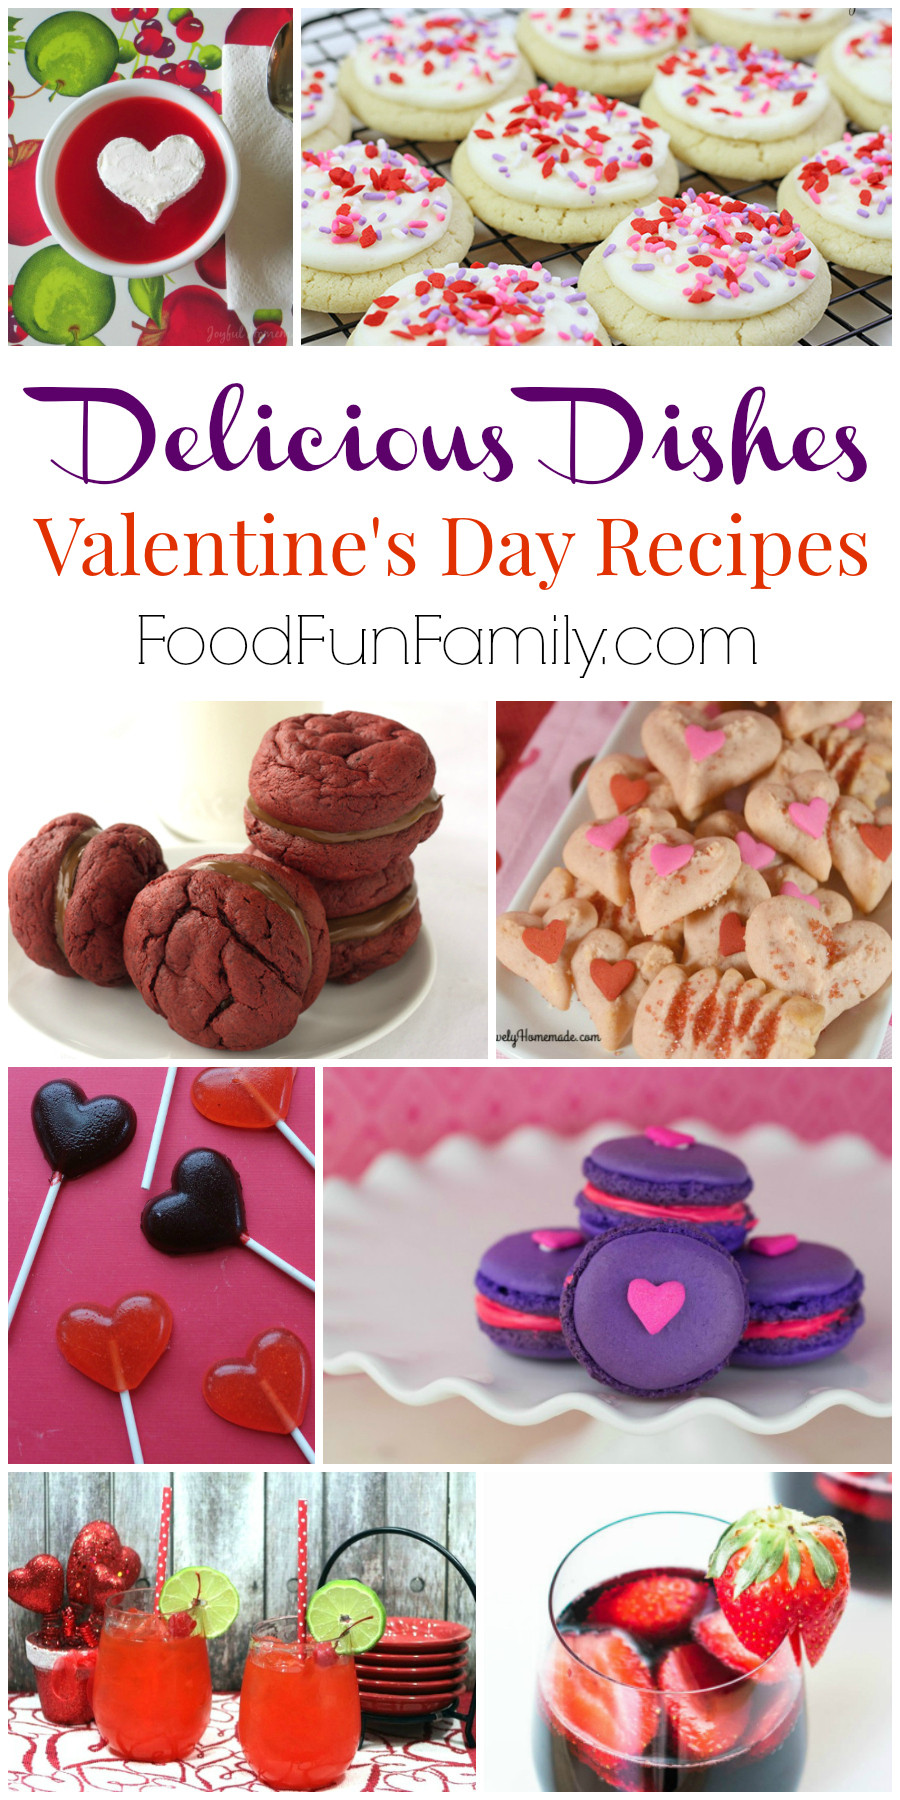 Valentines Day Party Foods
 Fun Valentine’s Day Recipes – Delicious Dishes Recipe Party